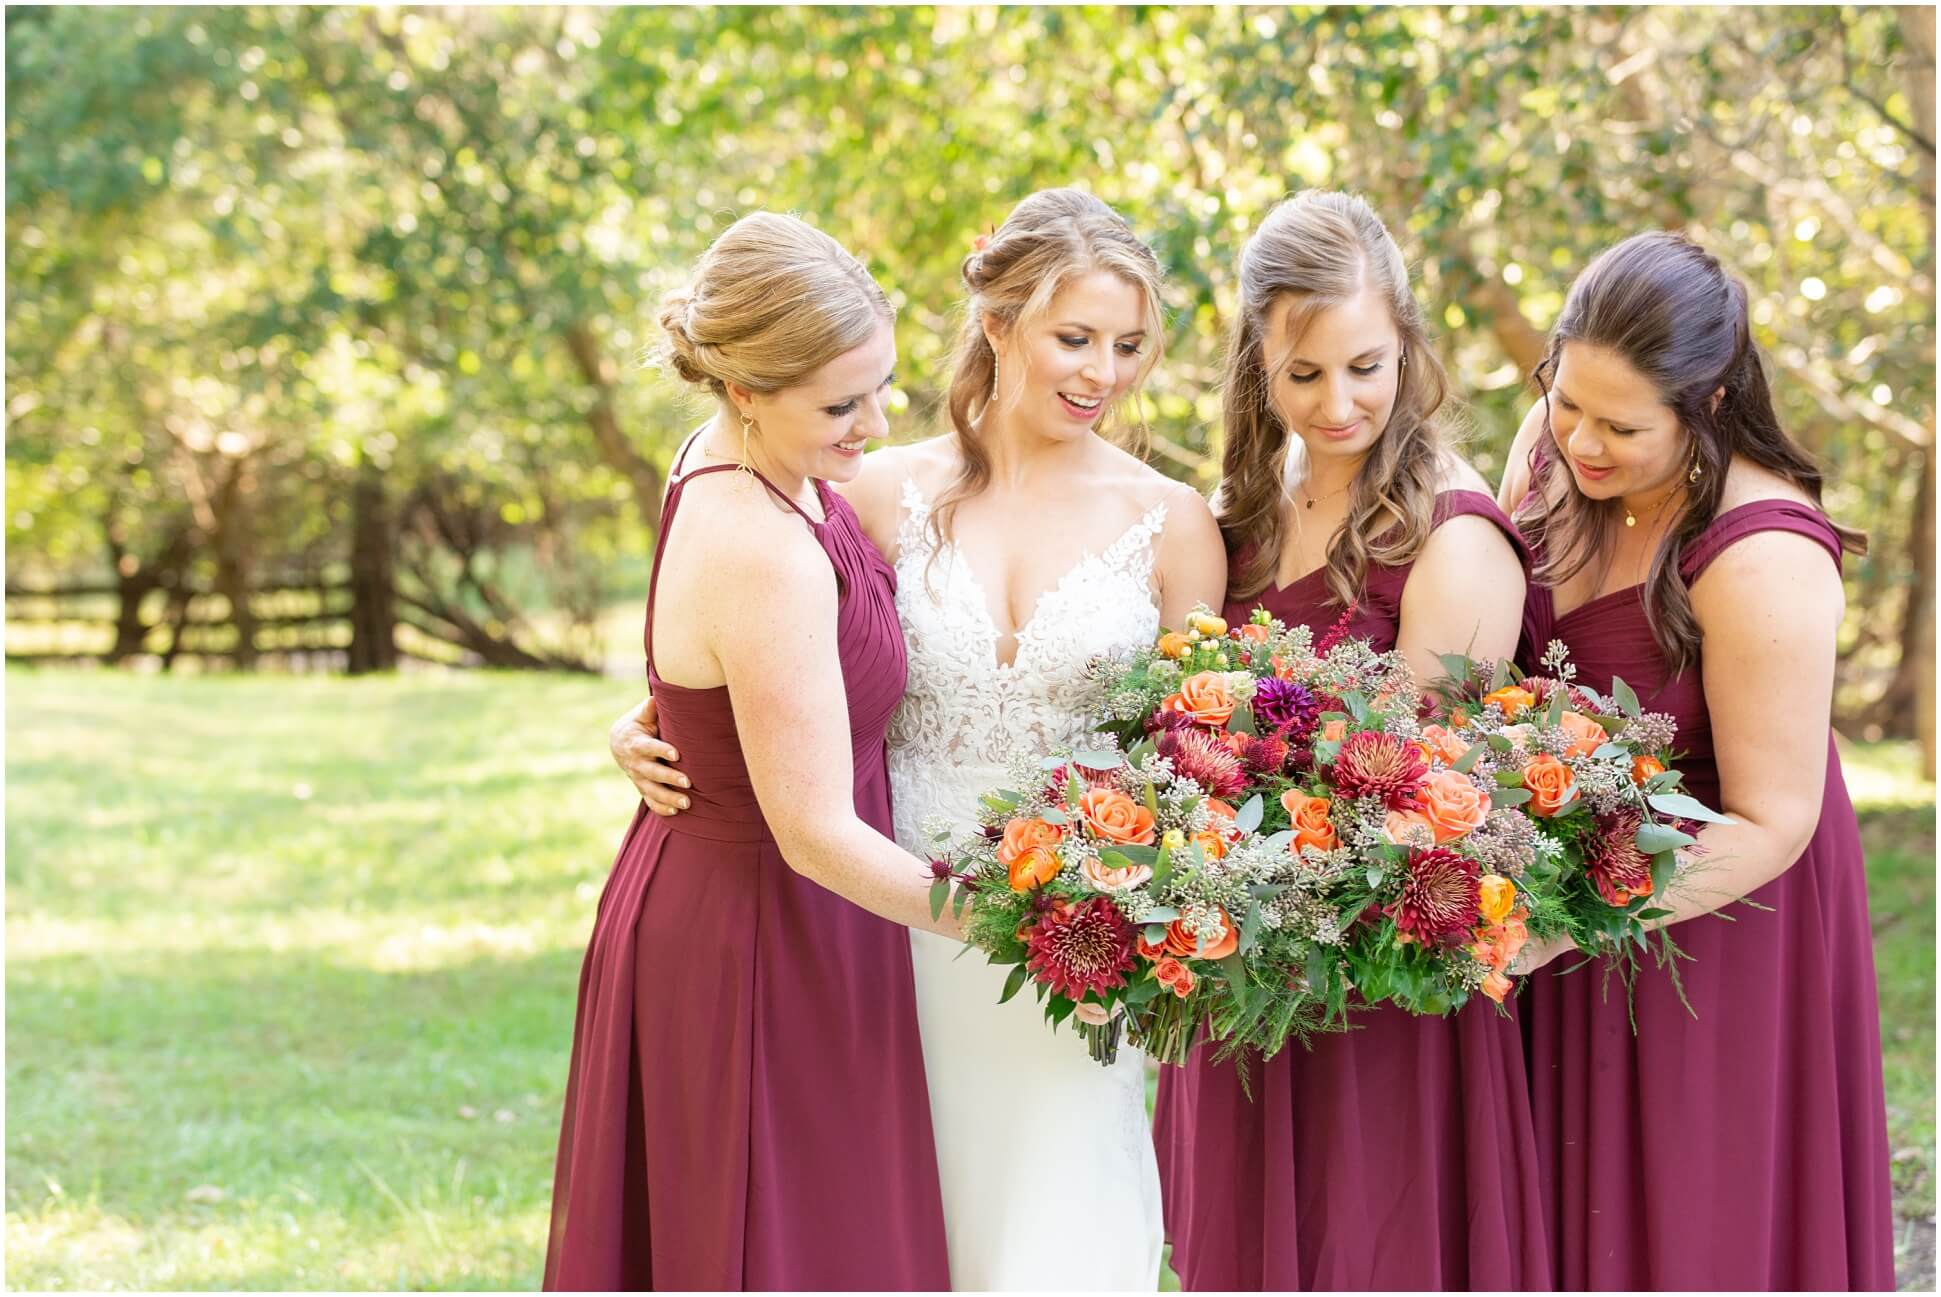 BRIDESMAIDS PORTRAITS, BRIDE IN WHITE LACE GOWN AND BRIDESMAIDS IN BURGUNDY DRESSES WITH FLORALS FROM RICK'S FLORALS